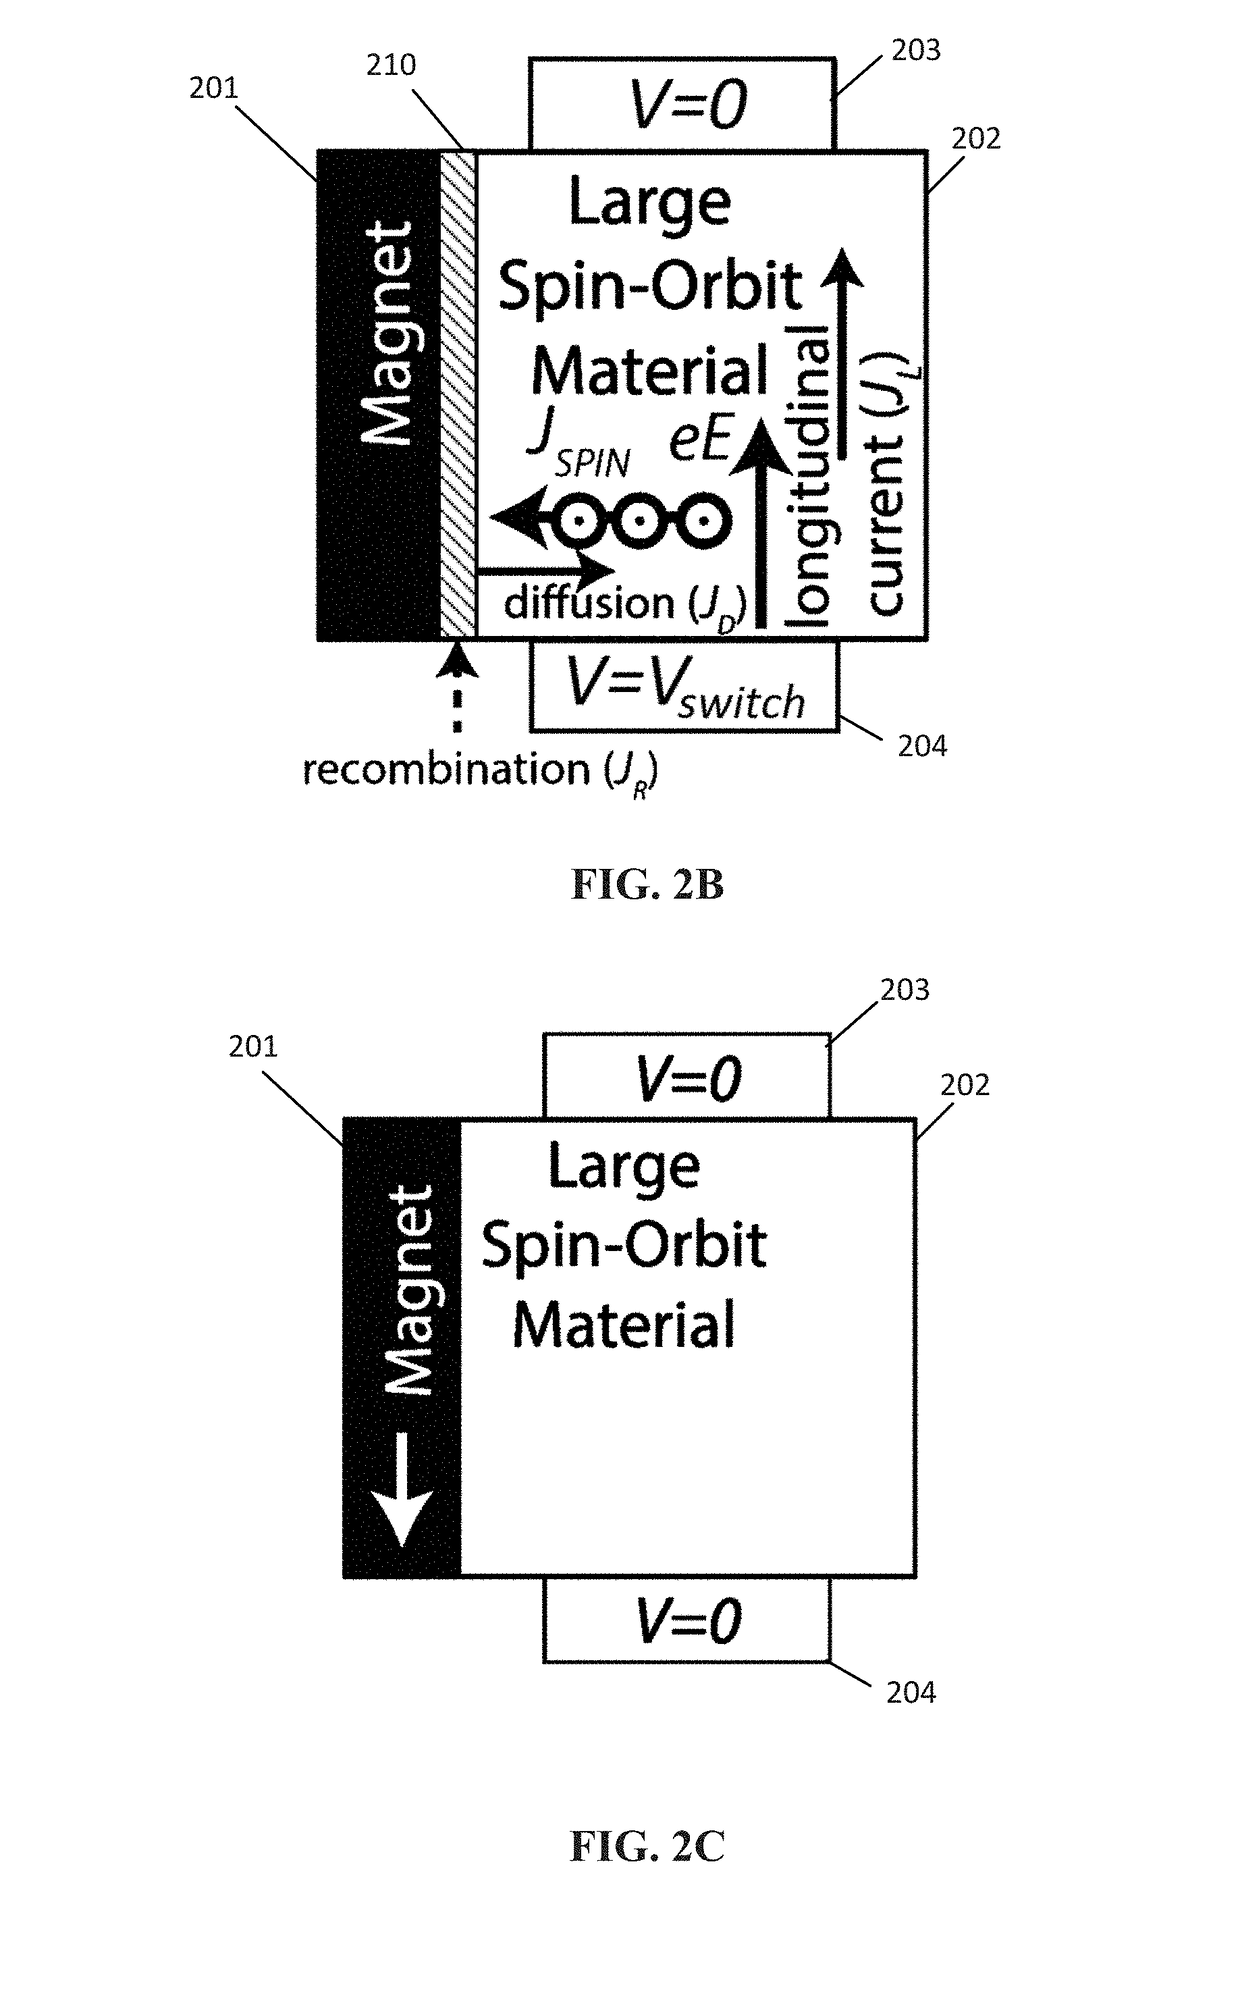 Voltage-controlled magnetic-based devices having topological insulator/magnetic insulator heterostructure